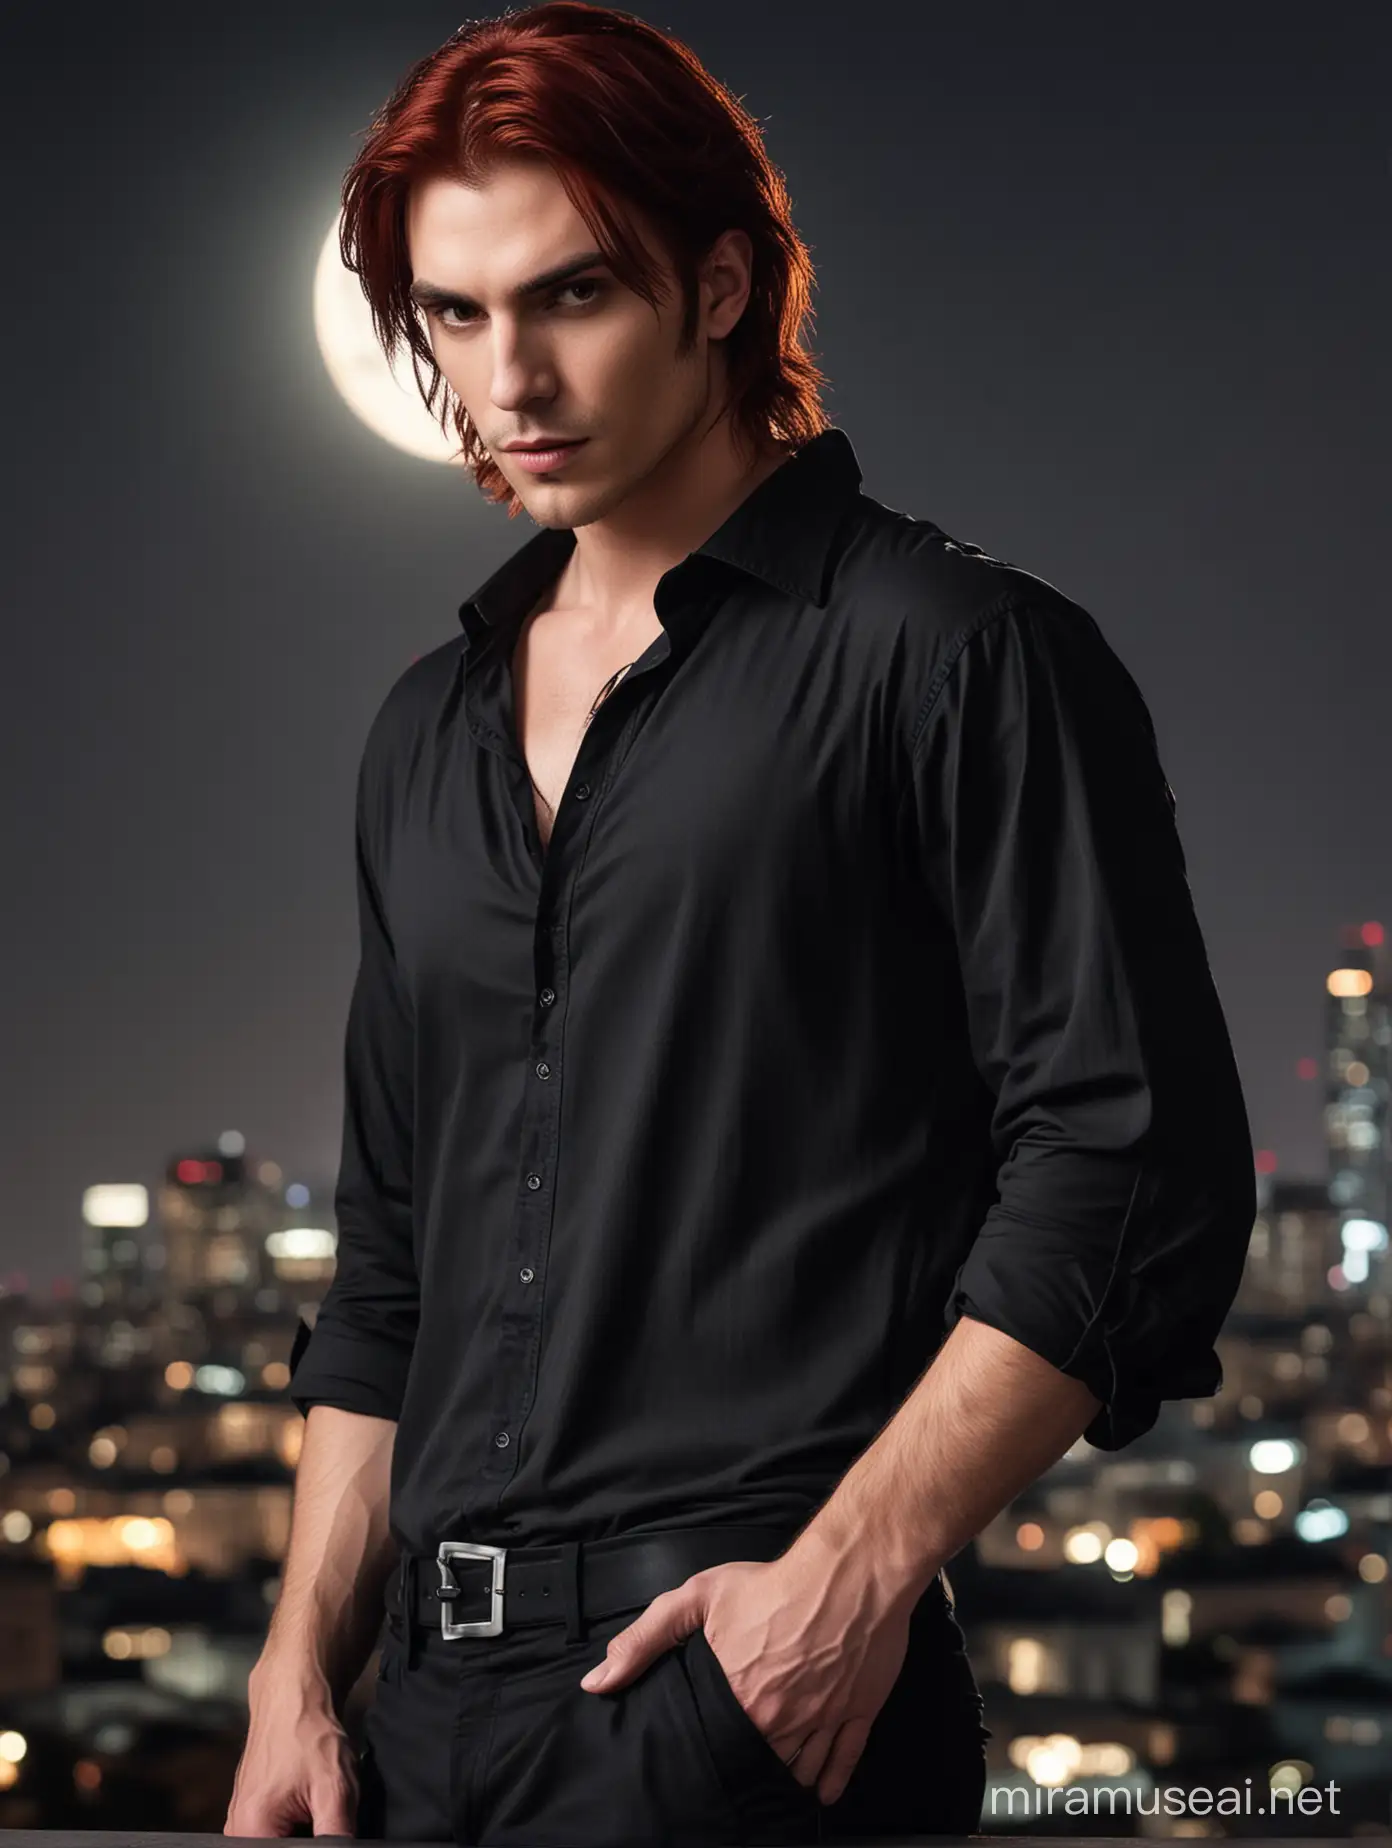 A handsome vampire man that has dark red hair and wearing a black shirt and black fitted pants while looking at the camera intently. The background should be black and there’s a buildings and city lights behind him and red full moon.